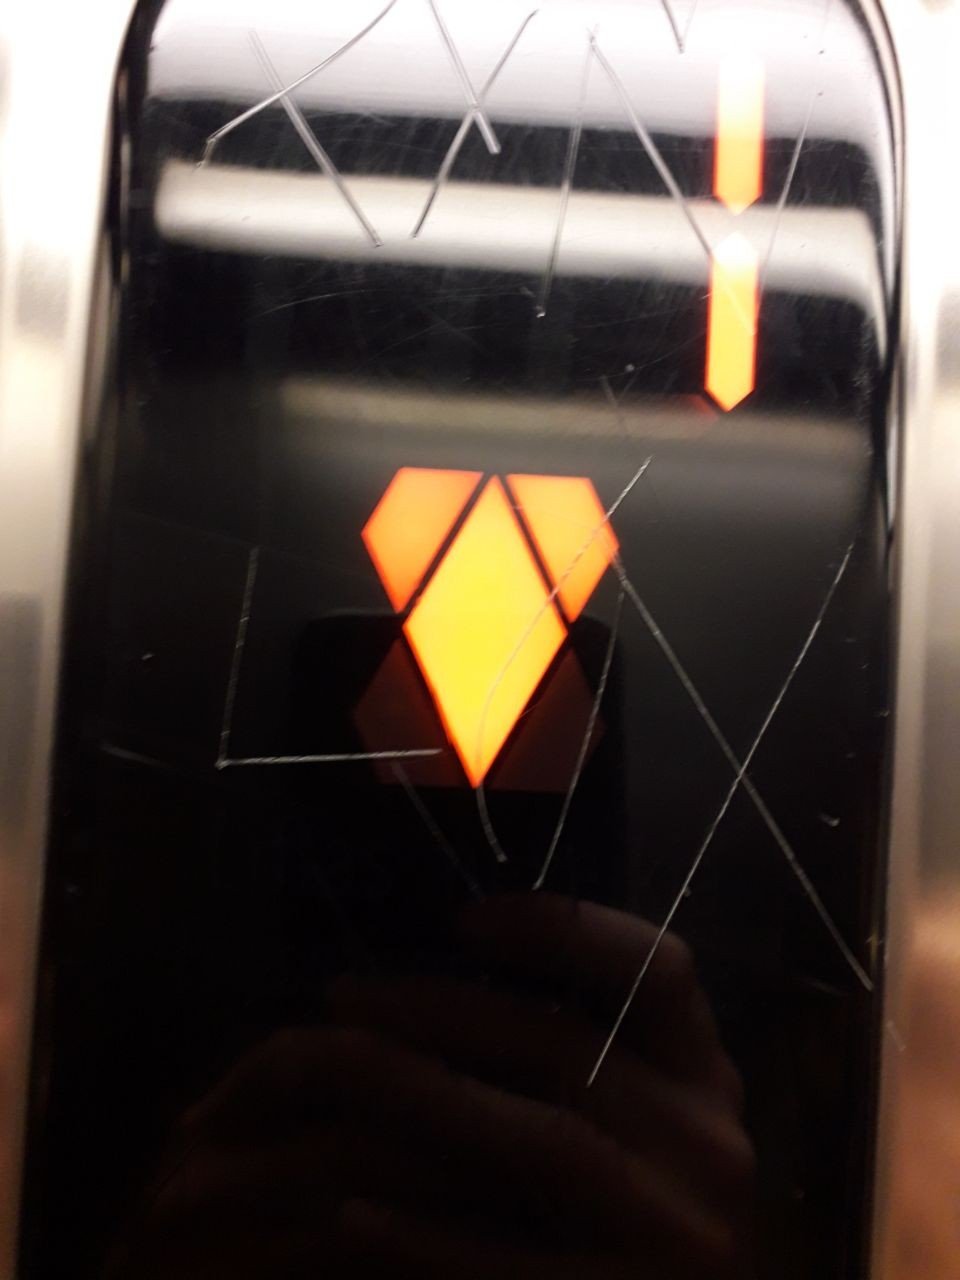 Photo by orgasm with the username @orgasm, who is a star user,  August 9, 2019 at 7:30 PM and the text says 'Do you see ? What does it look like?
Uh oh look what I found in the elevator! What immediately came to mind? #VIT #ViceIndustryToken !!! 🤣🤣🤣'